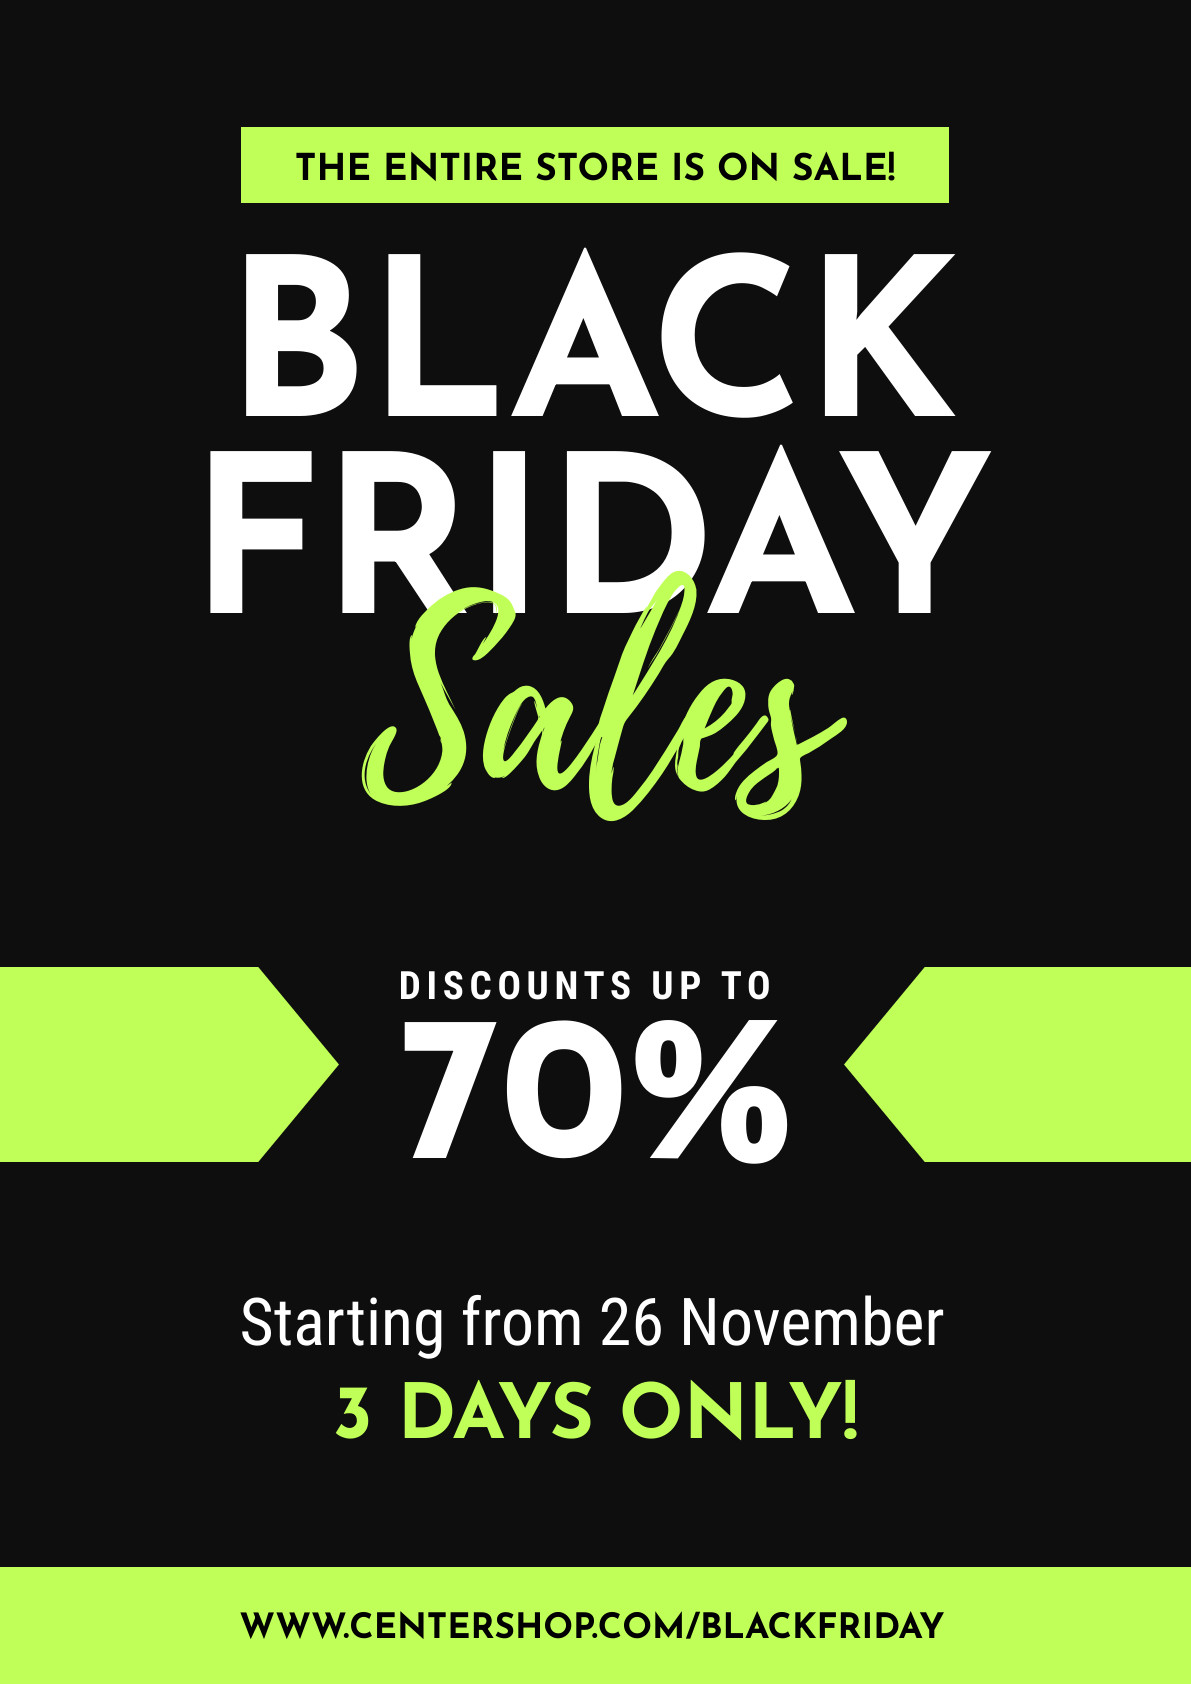 Black Friday Entire Store Sales 3 Days Only Poster